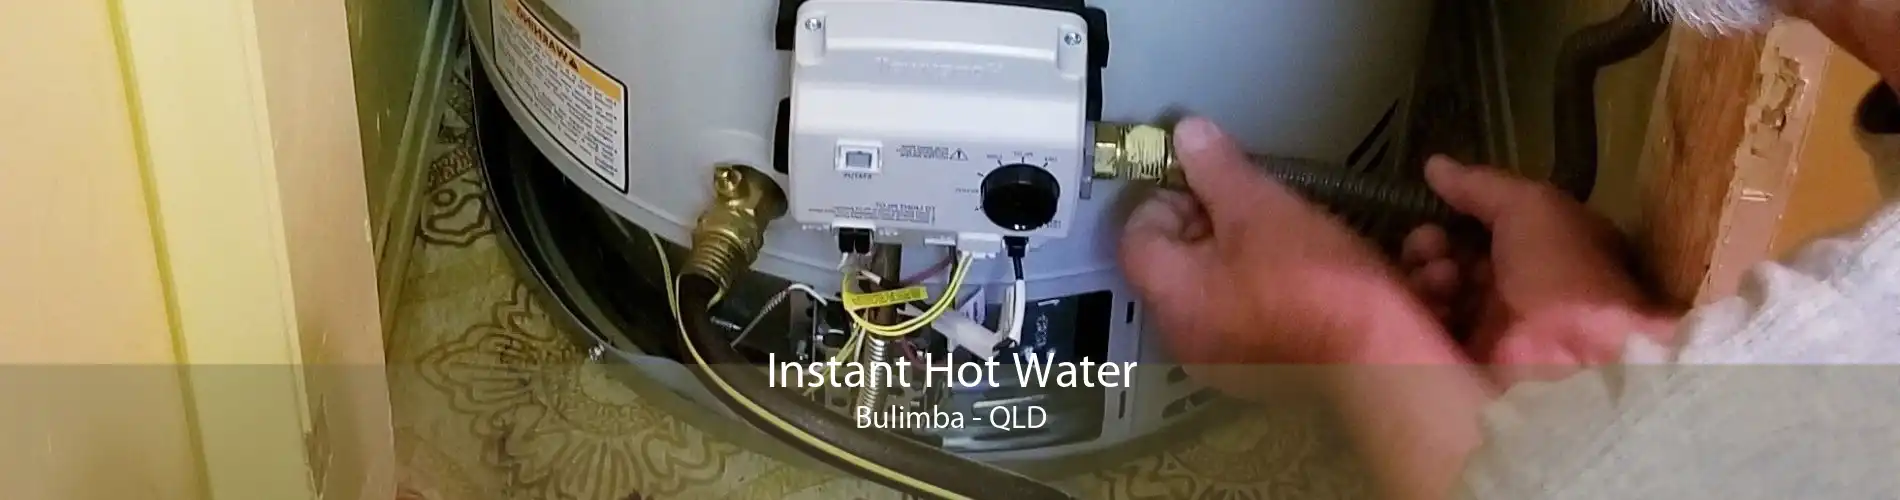 Instant Hot Water Bulimba - QLD